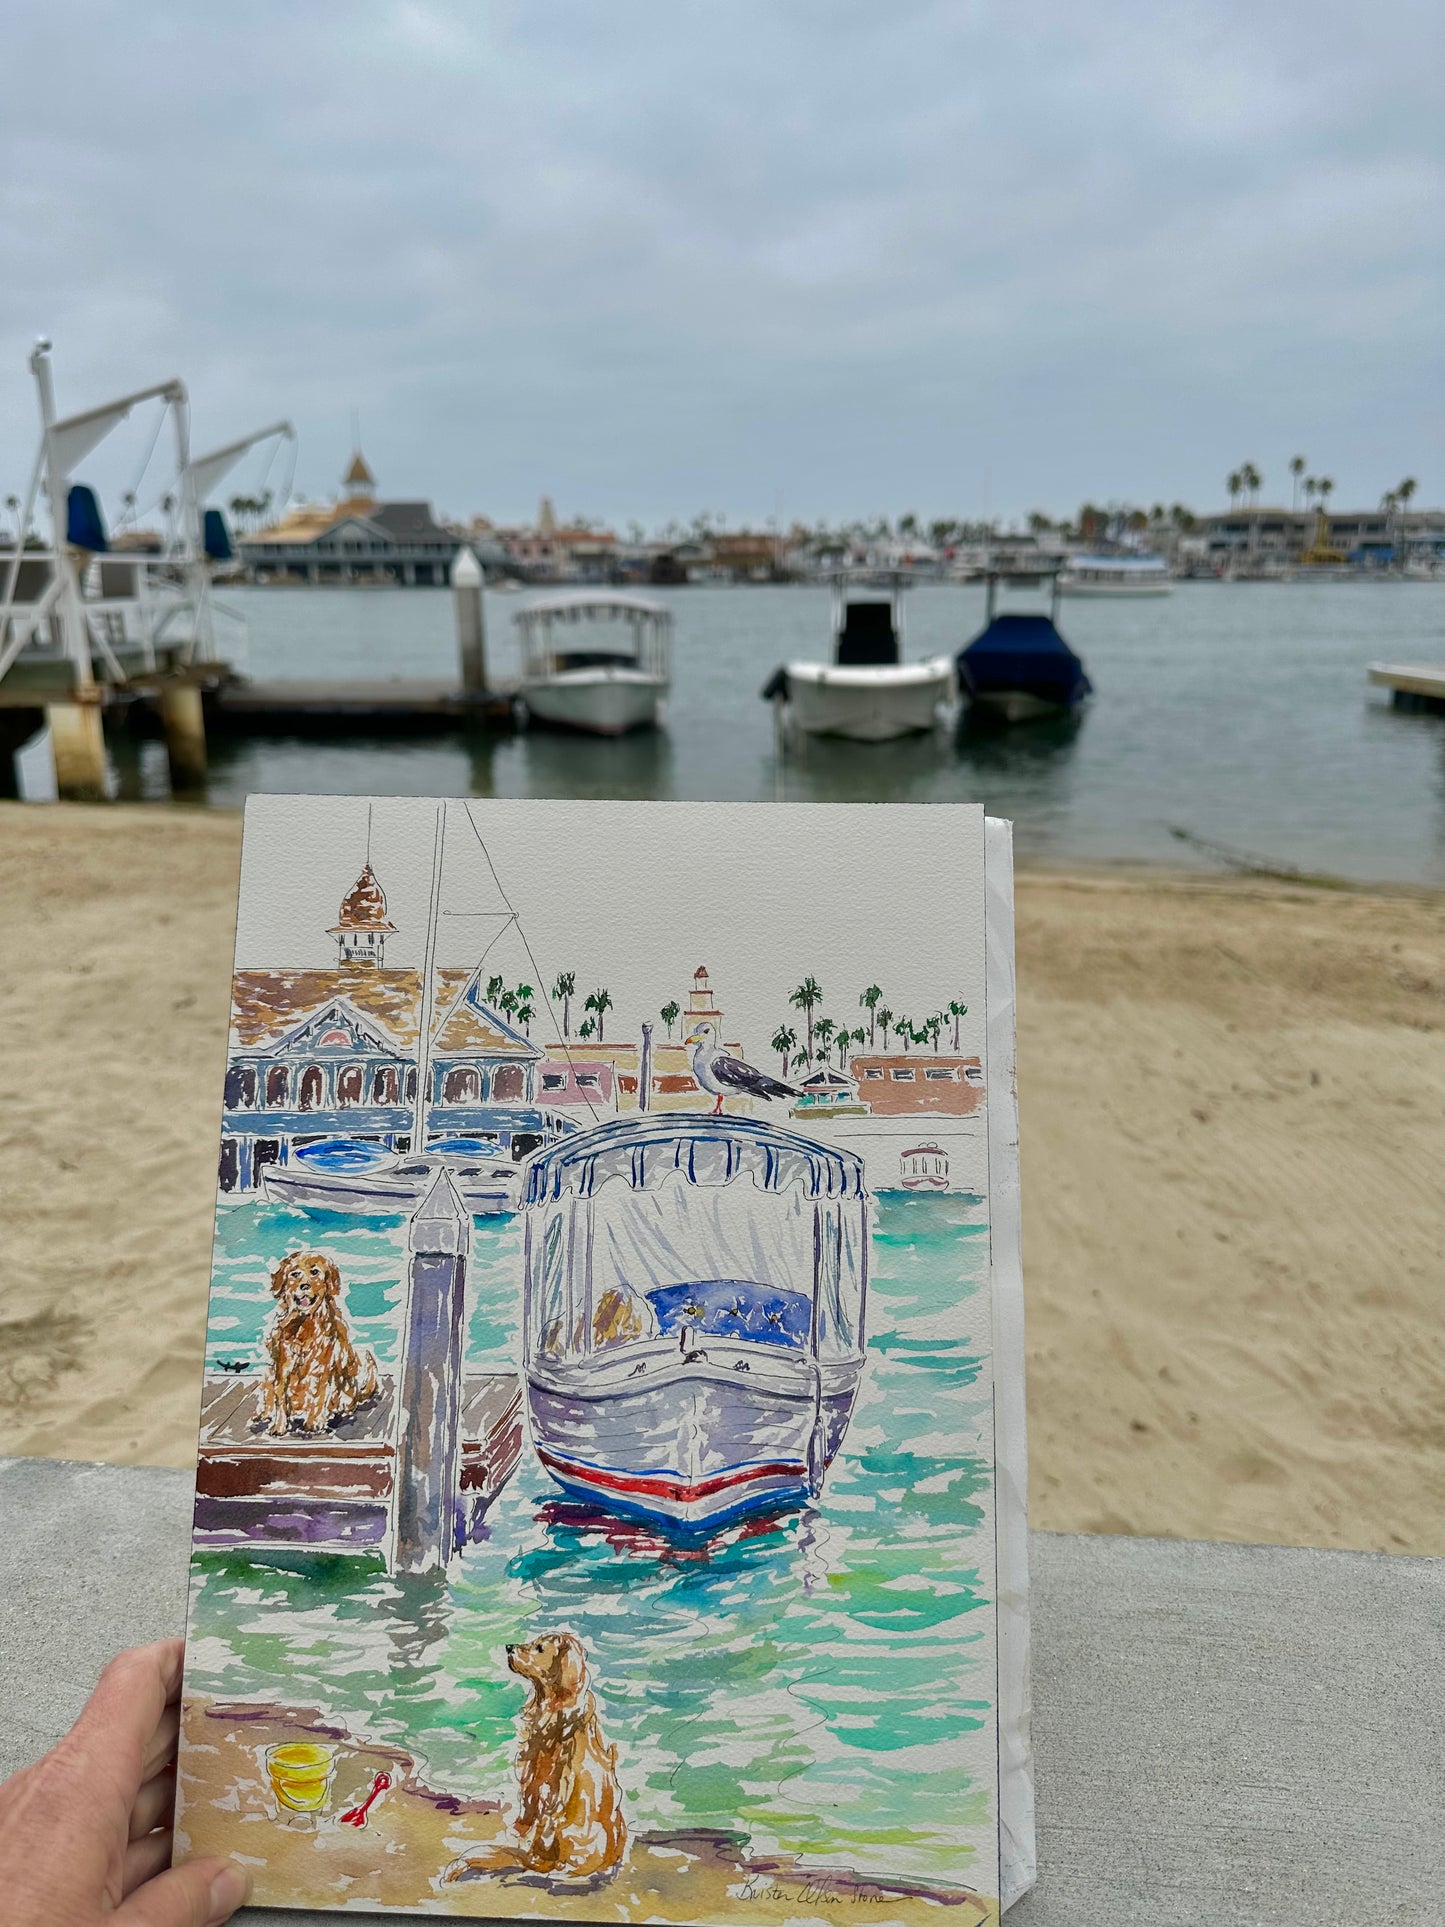 It's A Dog's Day On Balboa, An Original 14" x 10" Watercolor And Ink Painting Of Golden Retrievers, Duffy Boats And The Balboa Pavillion